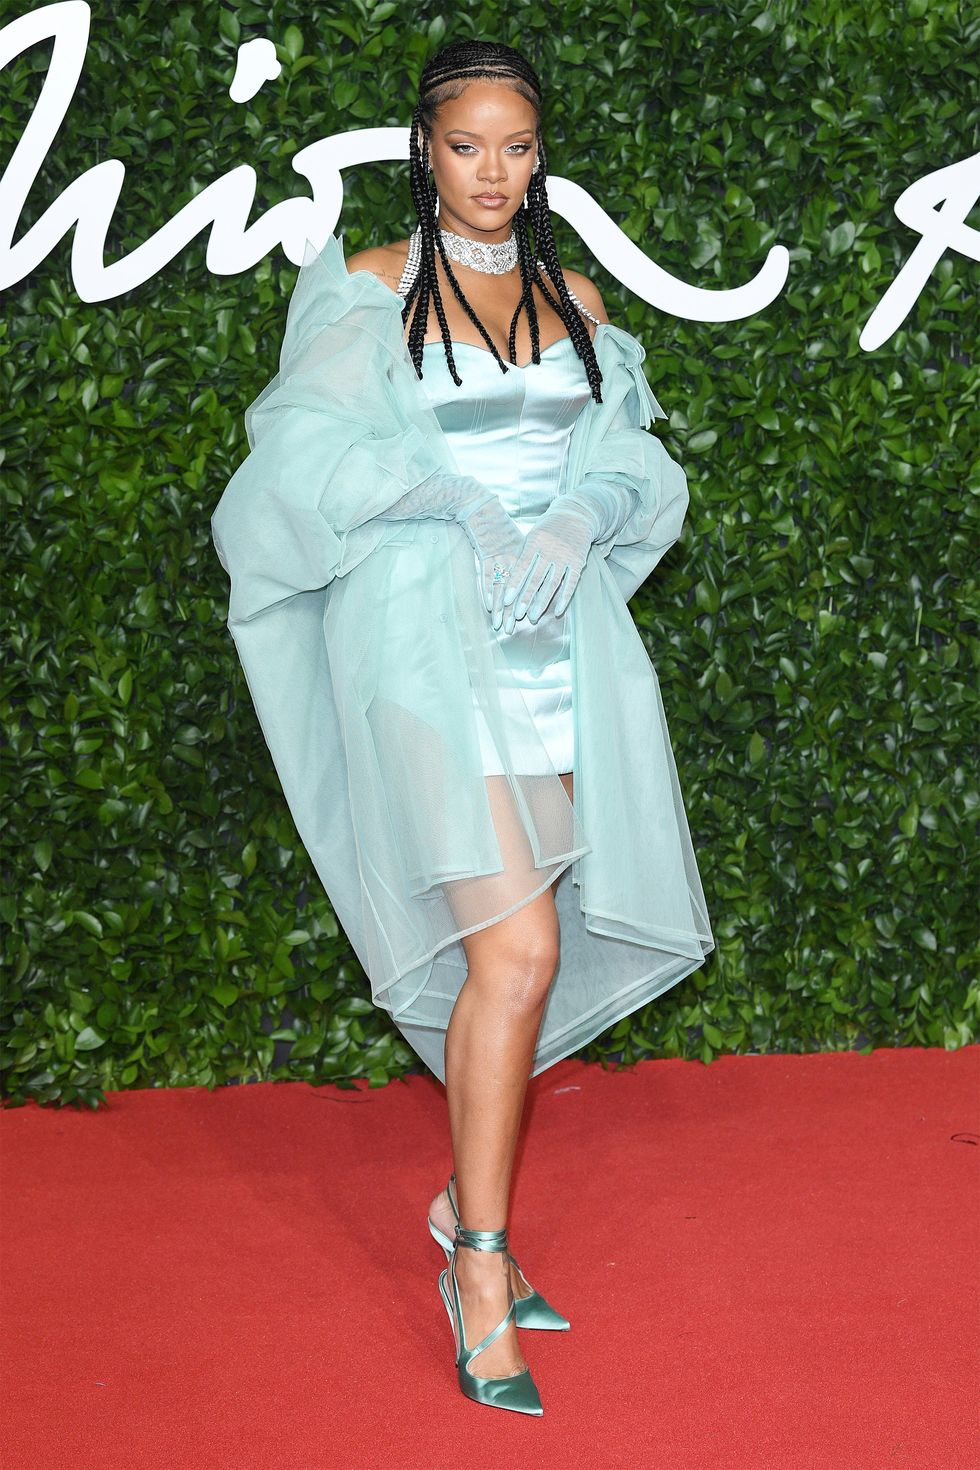 Puffer Coat Gowns Take Over the Red Carpet at the 2019 Fashion Awards - Puffer Coat Gowns Take Over the Red Carpet at the 2019 Fashion Awards -   19 style Dress red ideas